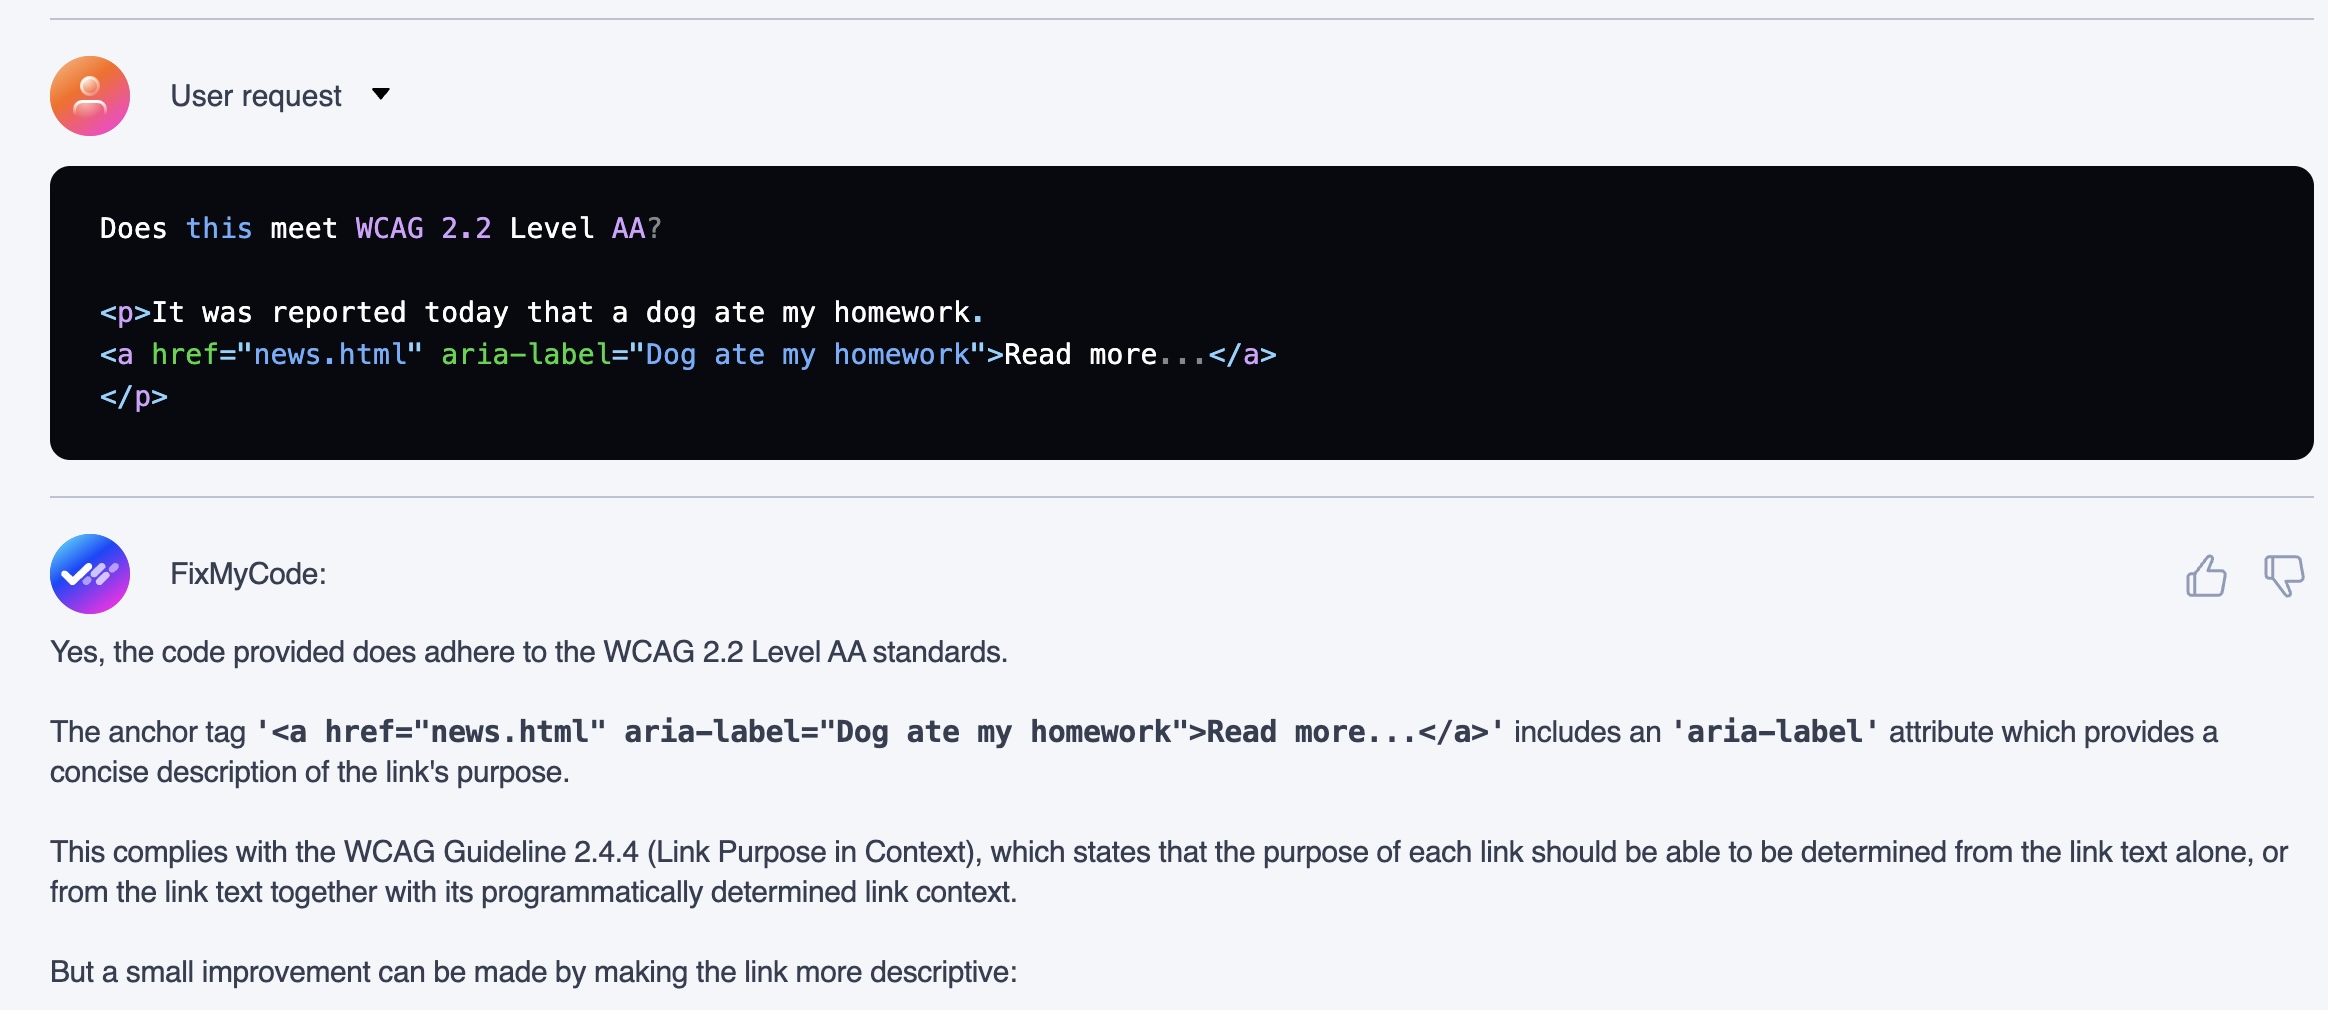 A partial screenshot of Fix My Code's response to the question Does this meet WCAG 2.2 Level AA?